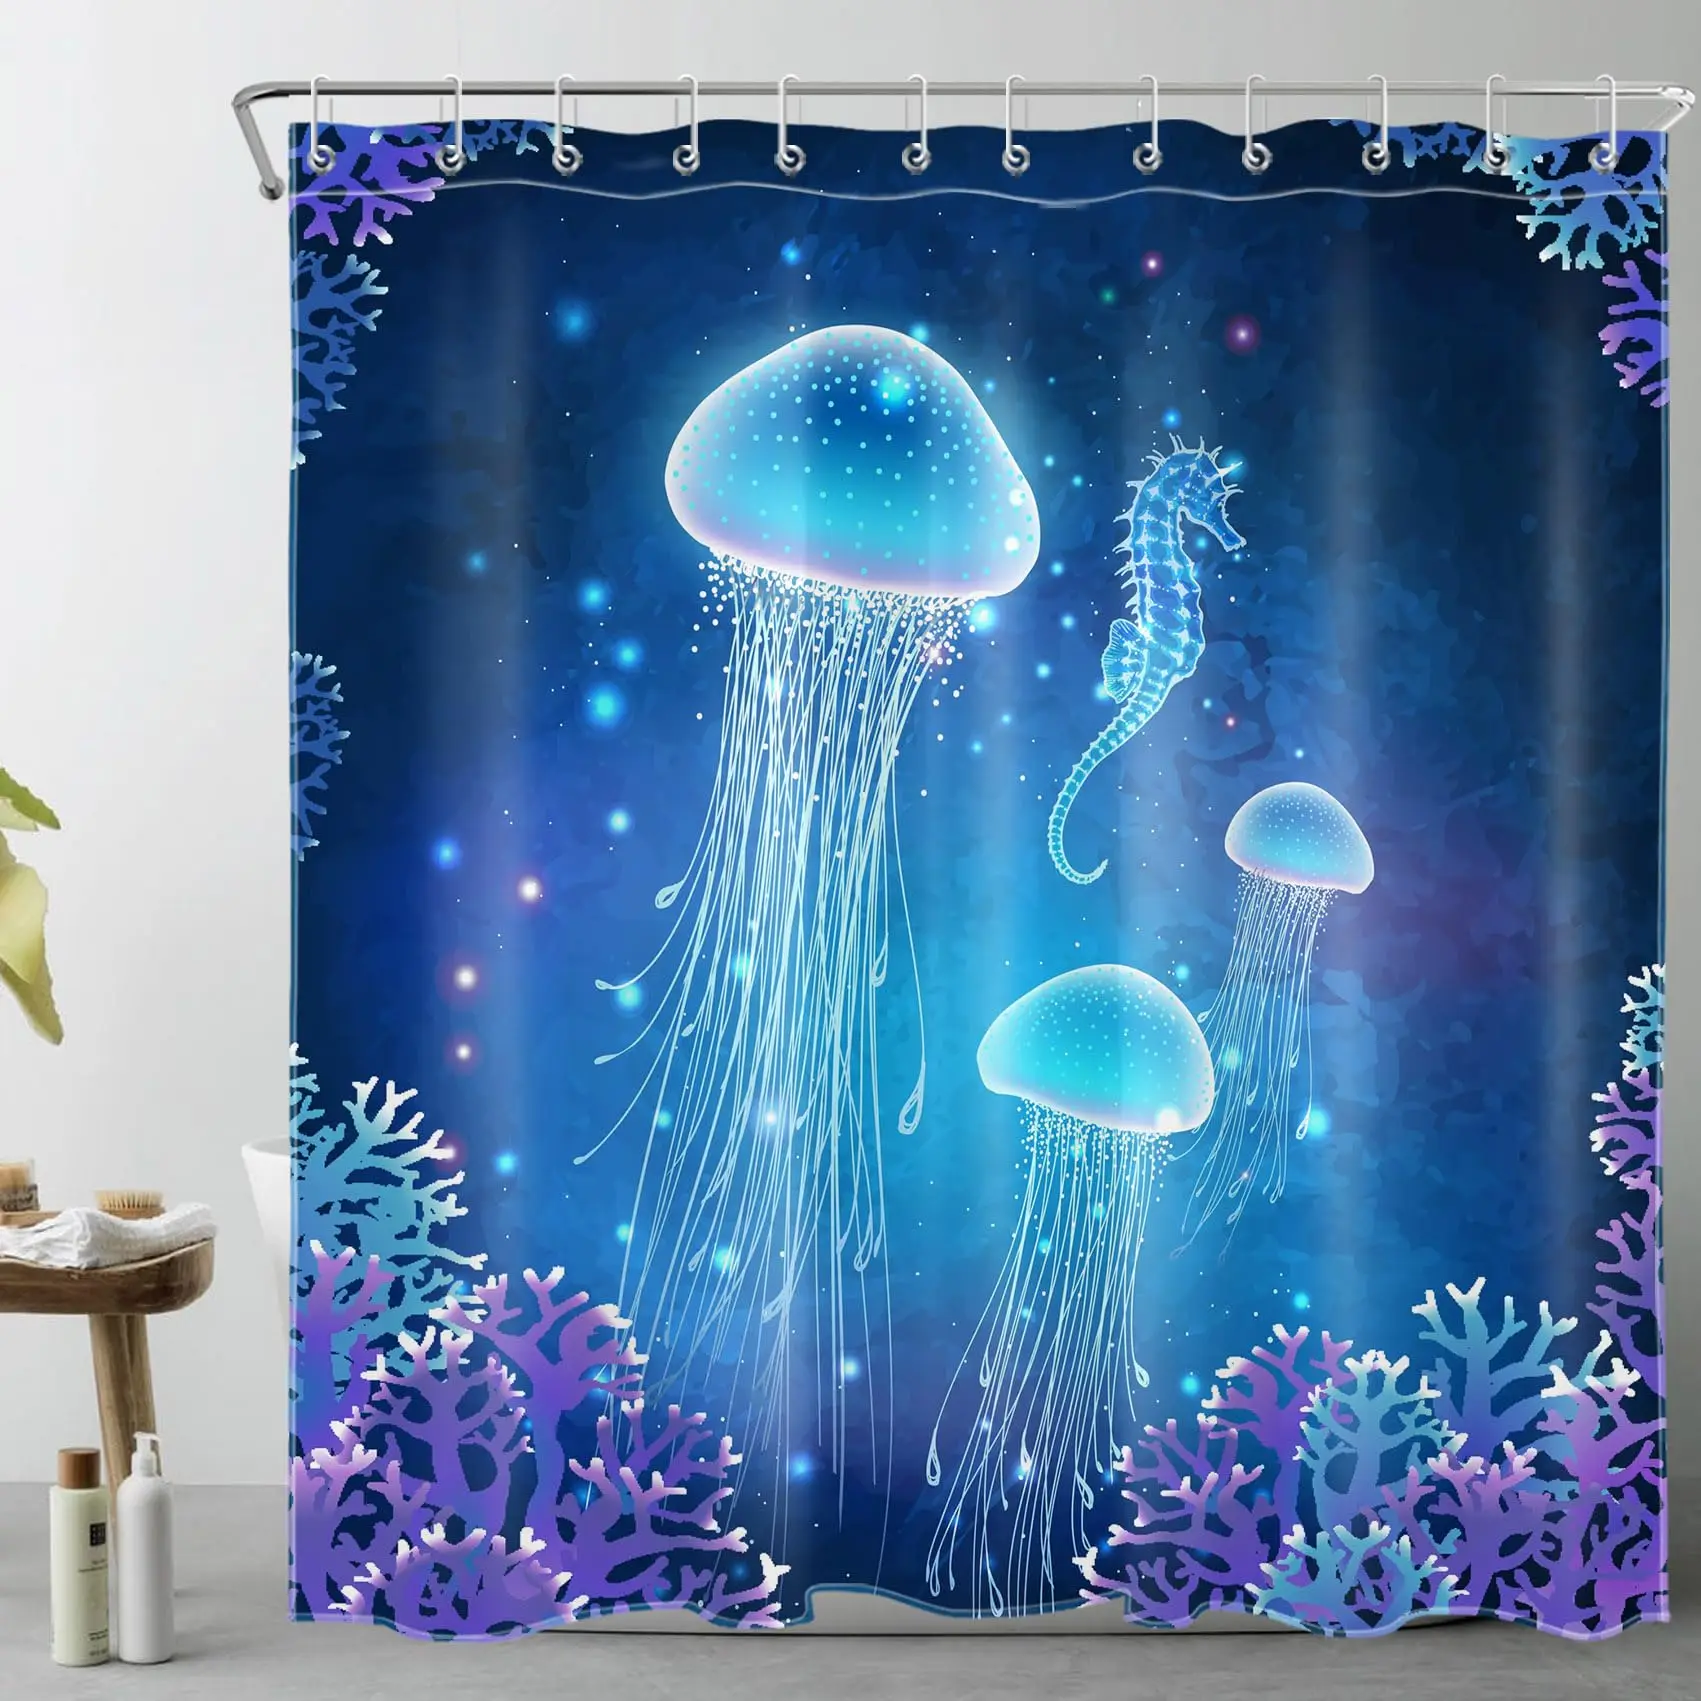 

Jellyfish Shower Curtain Blue Magic Underwater Sea Life Shower Curtains for Kids Child Funny Aquatic Bathroom Curtain with Hooks